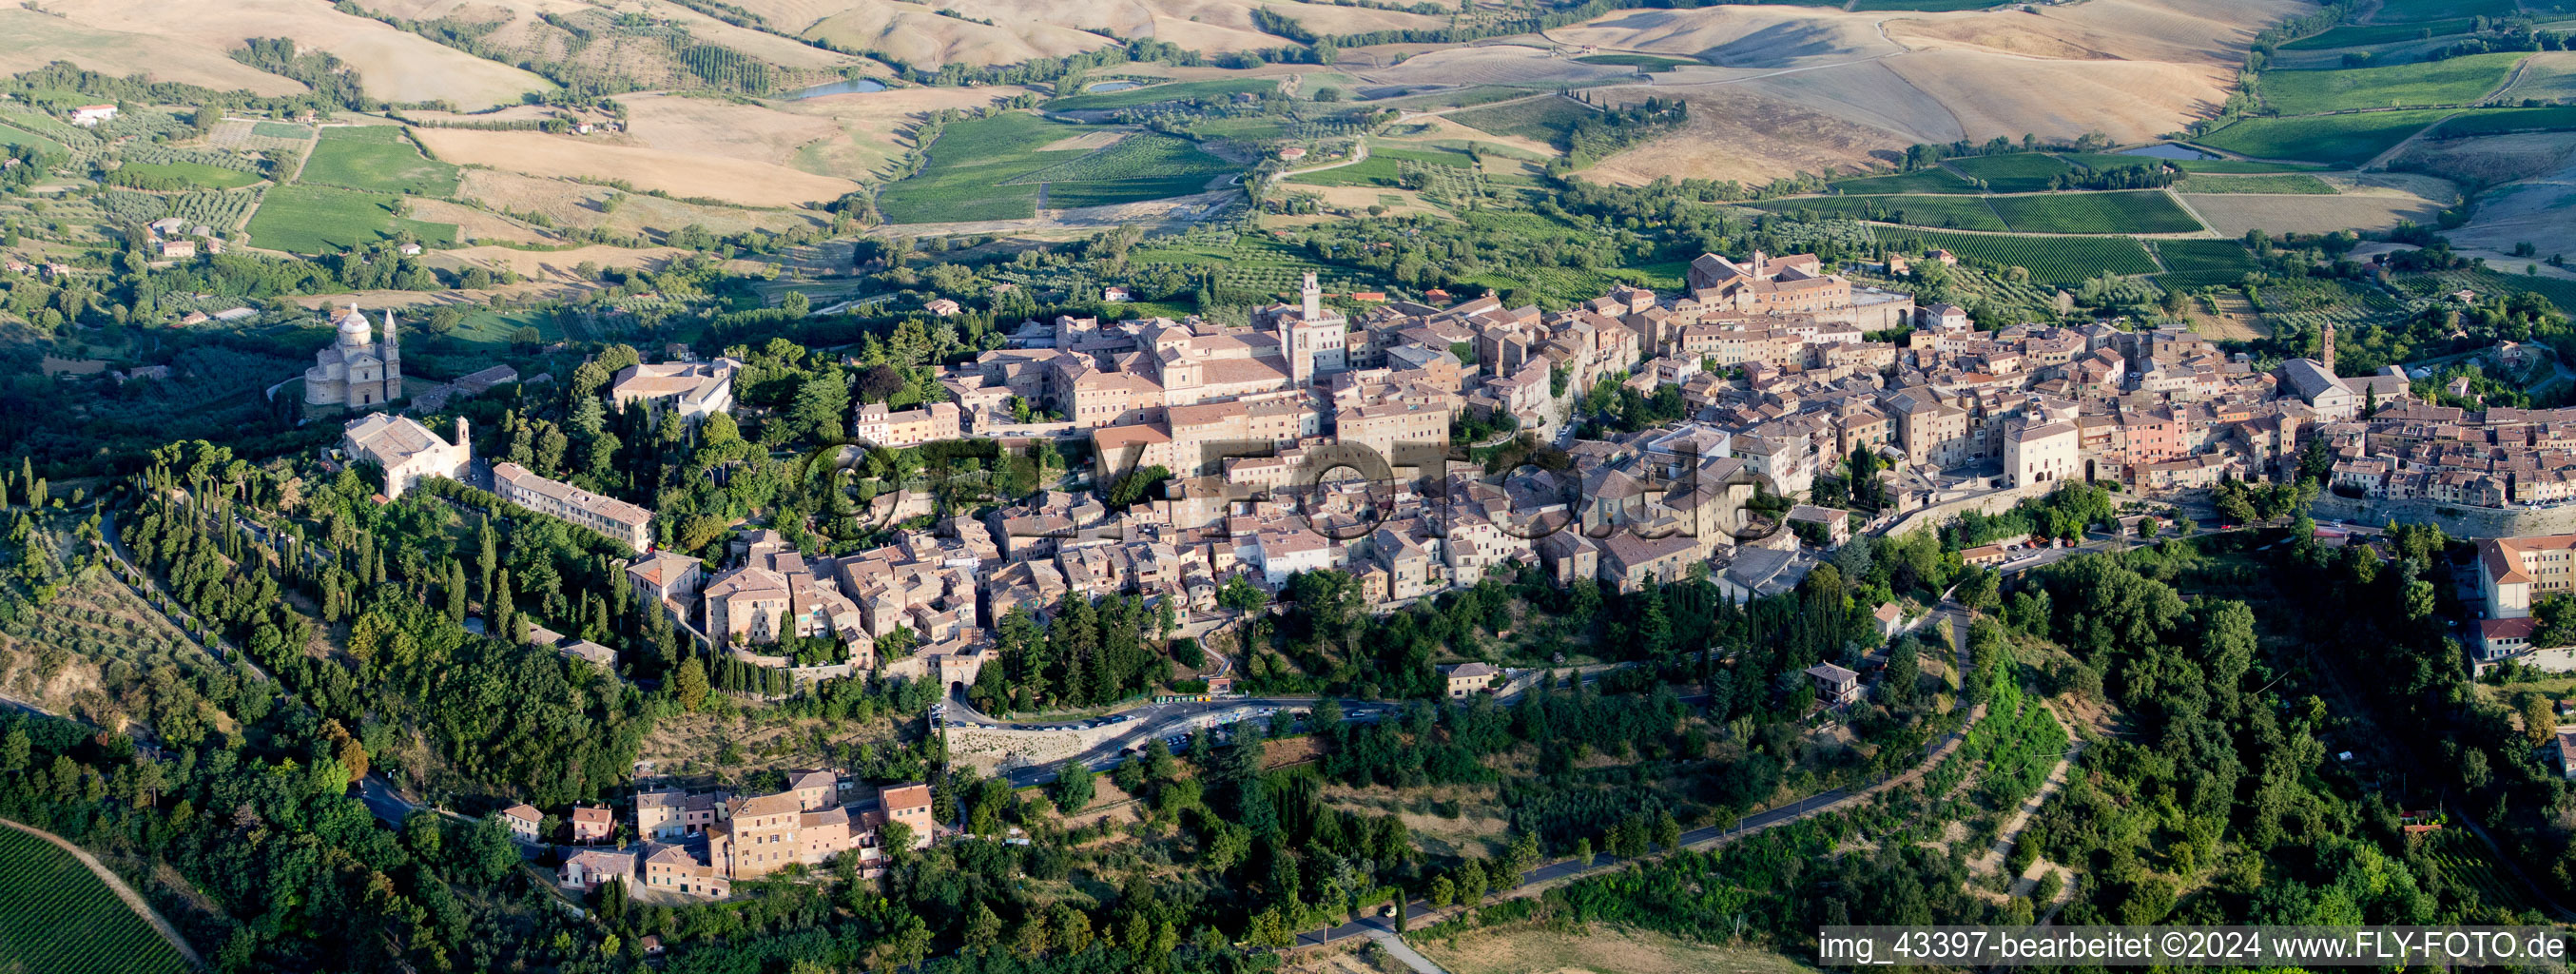 Panorama from the local area and environment in Montepulciano in Toscana, Italy